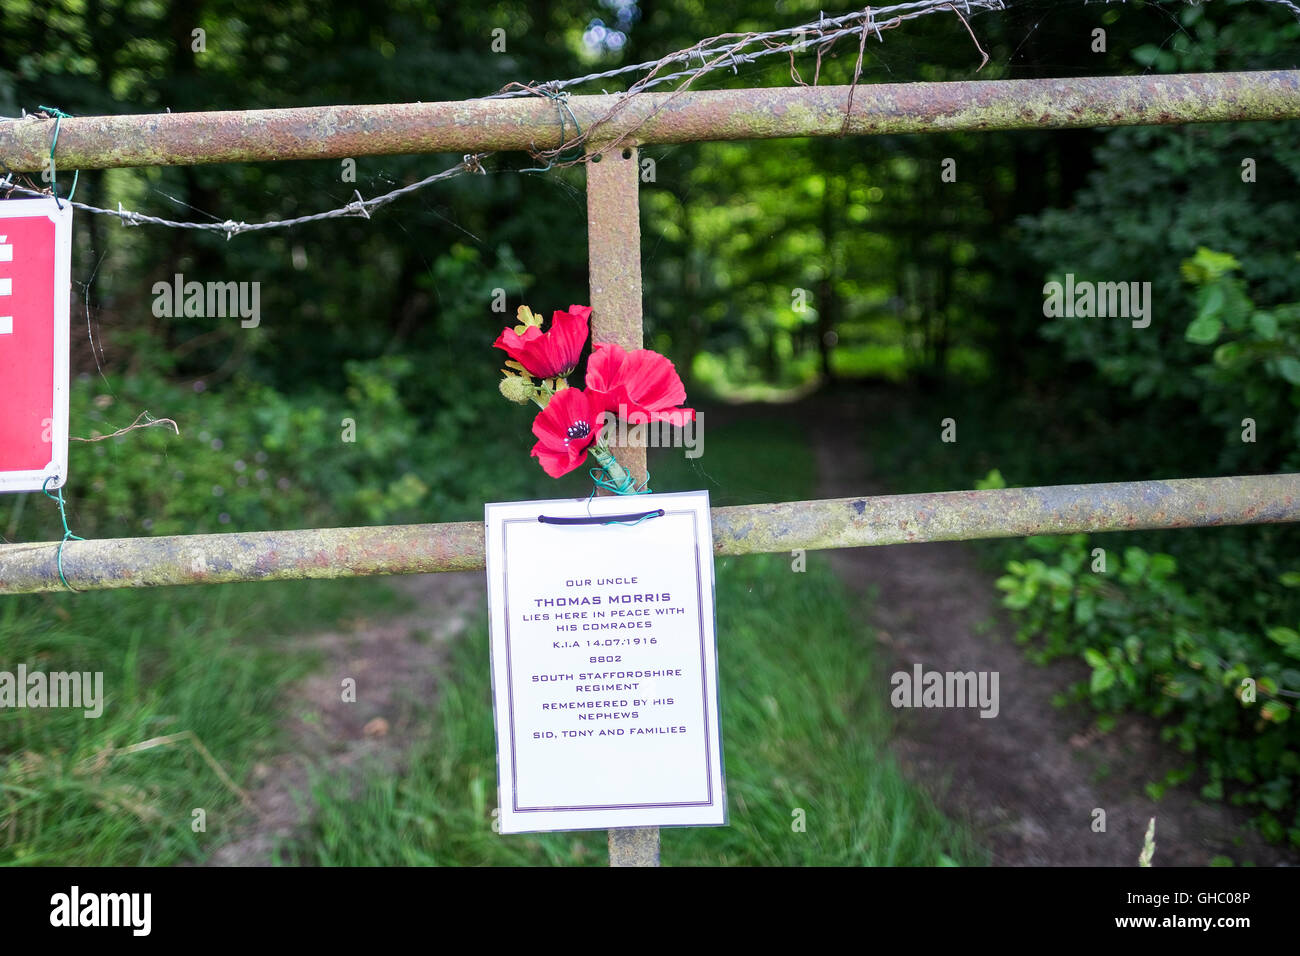 A personal memorial at High Wood, Bazentin-le-Petit, France to Thomas Morris, of the South Staffordshire Regiment. Stock Photo